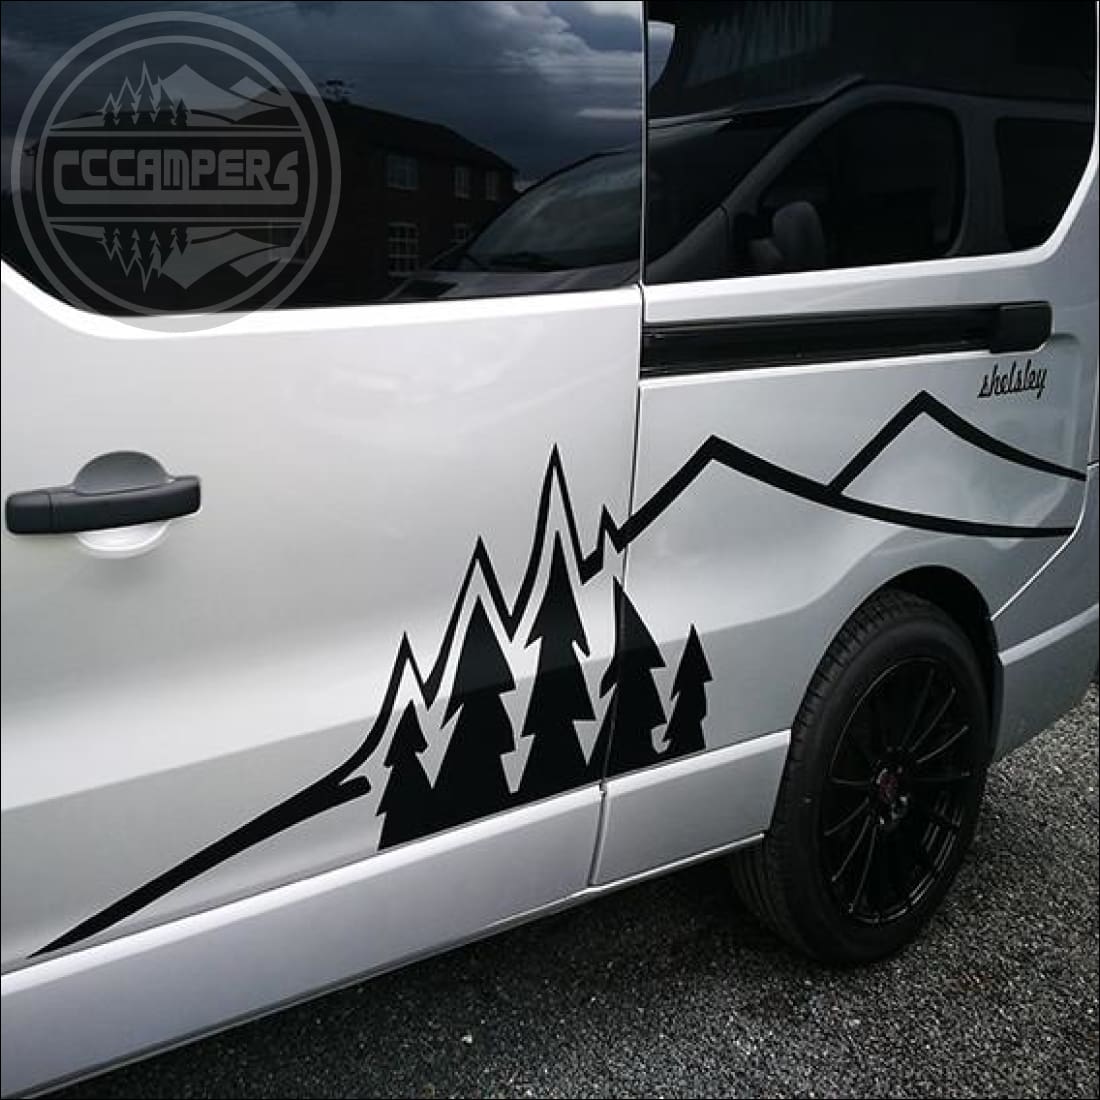 CCCAMPERS decals for insurance claims - cccampers.myshopify.com